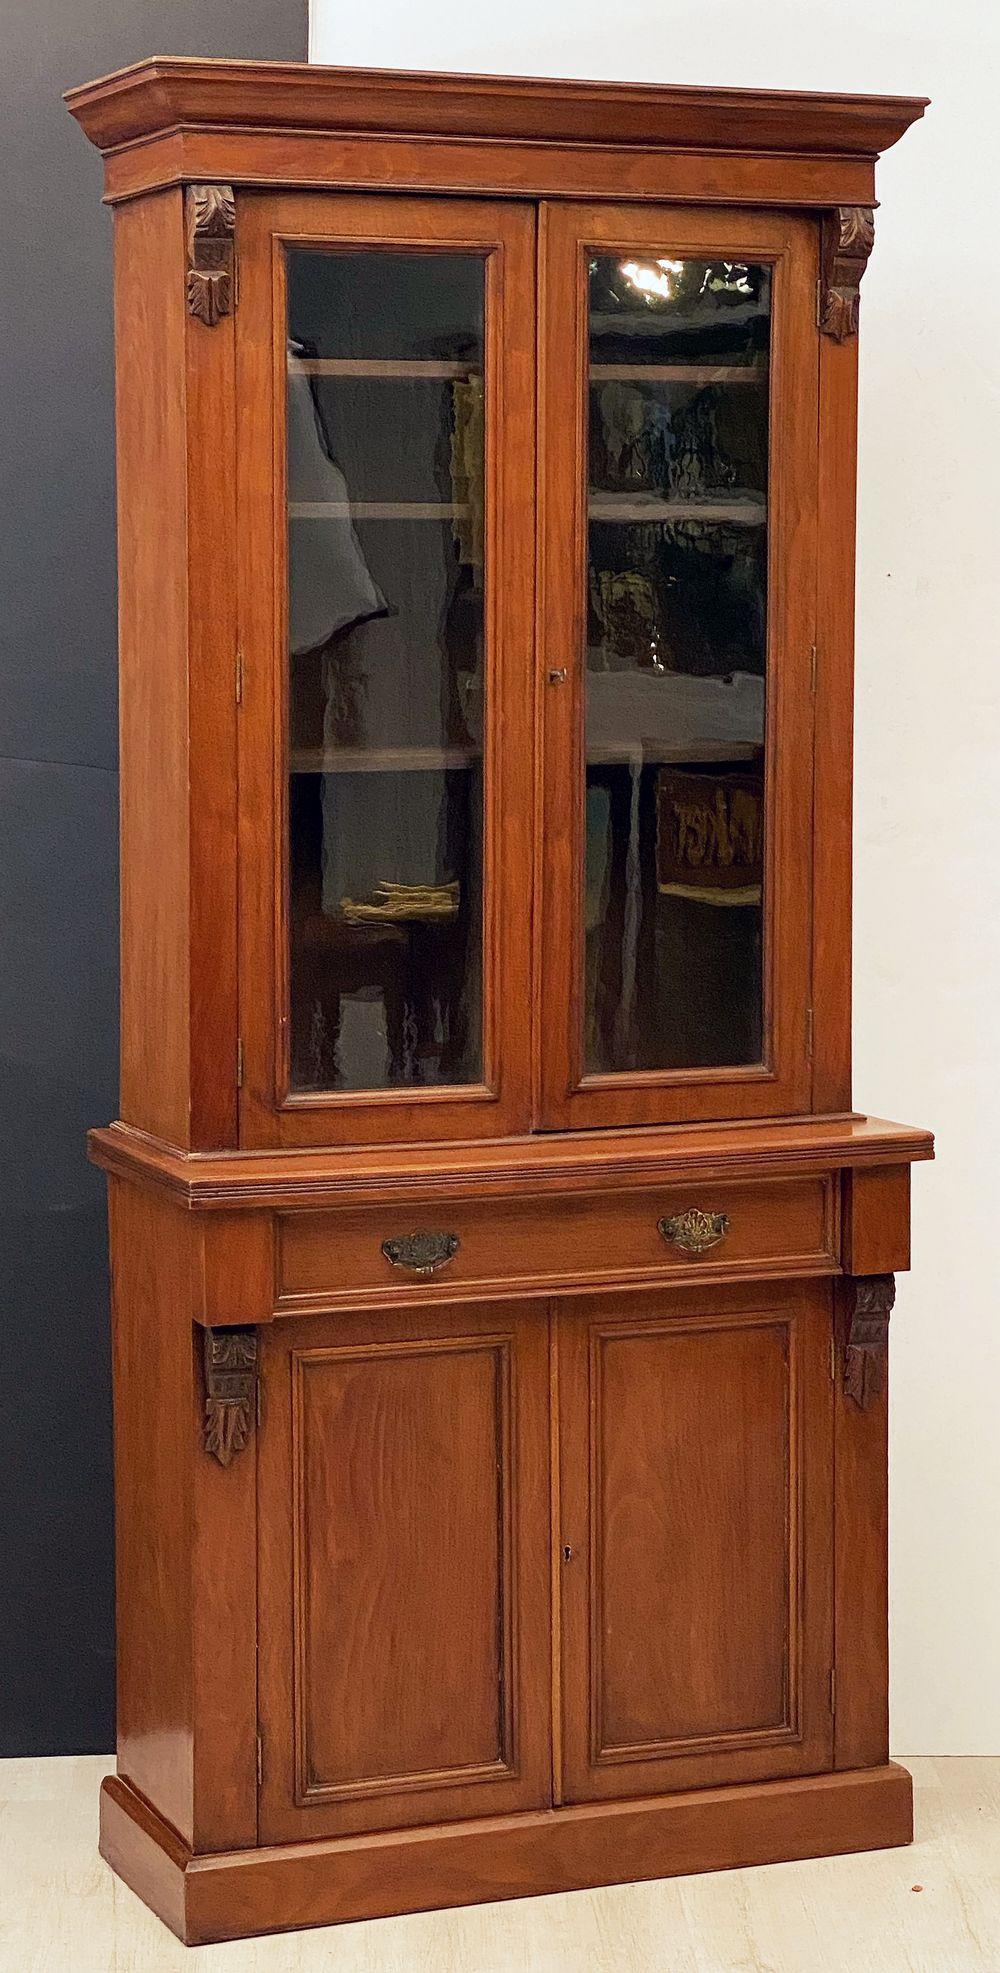 A fine English two-tied bookcase cabinet of mahogany from the 19th century, featuring an upper tier with crown moulding over two glazed doors, opening to three shelves of adjustable height. 
Mounted to a bottom tier showing a frieze of one long